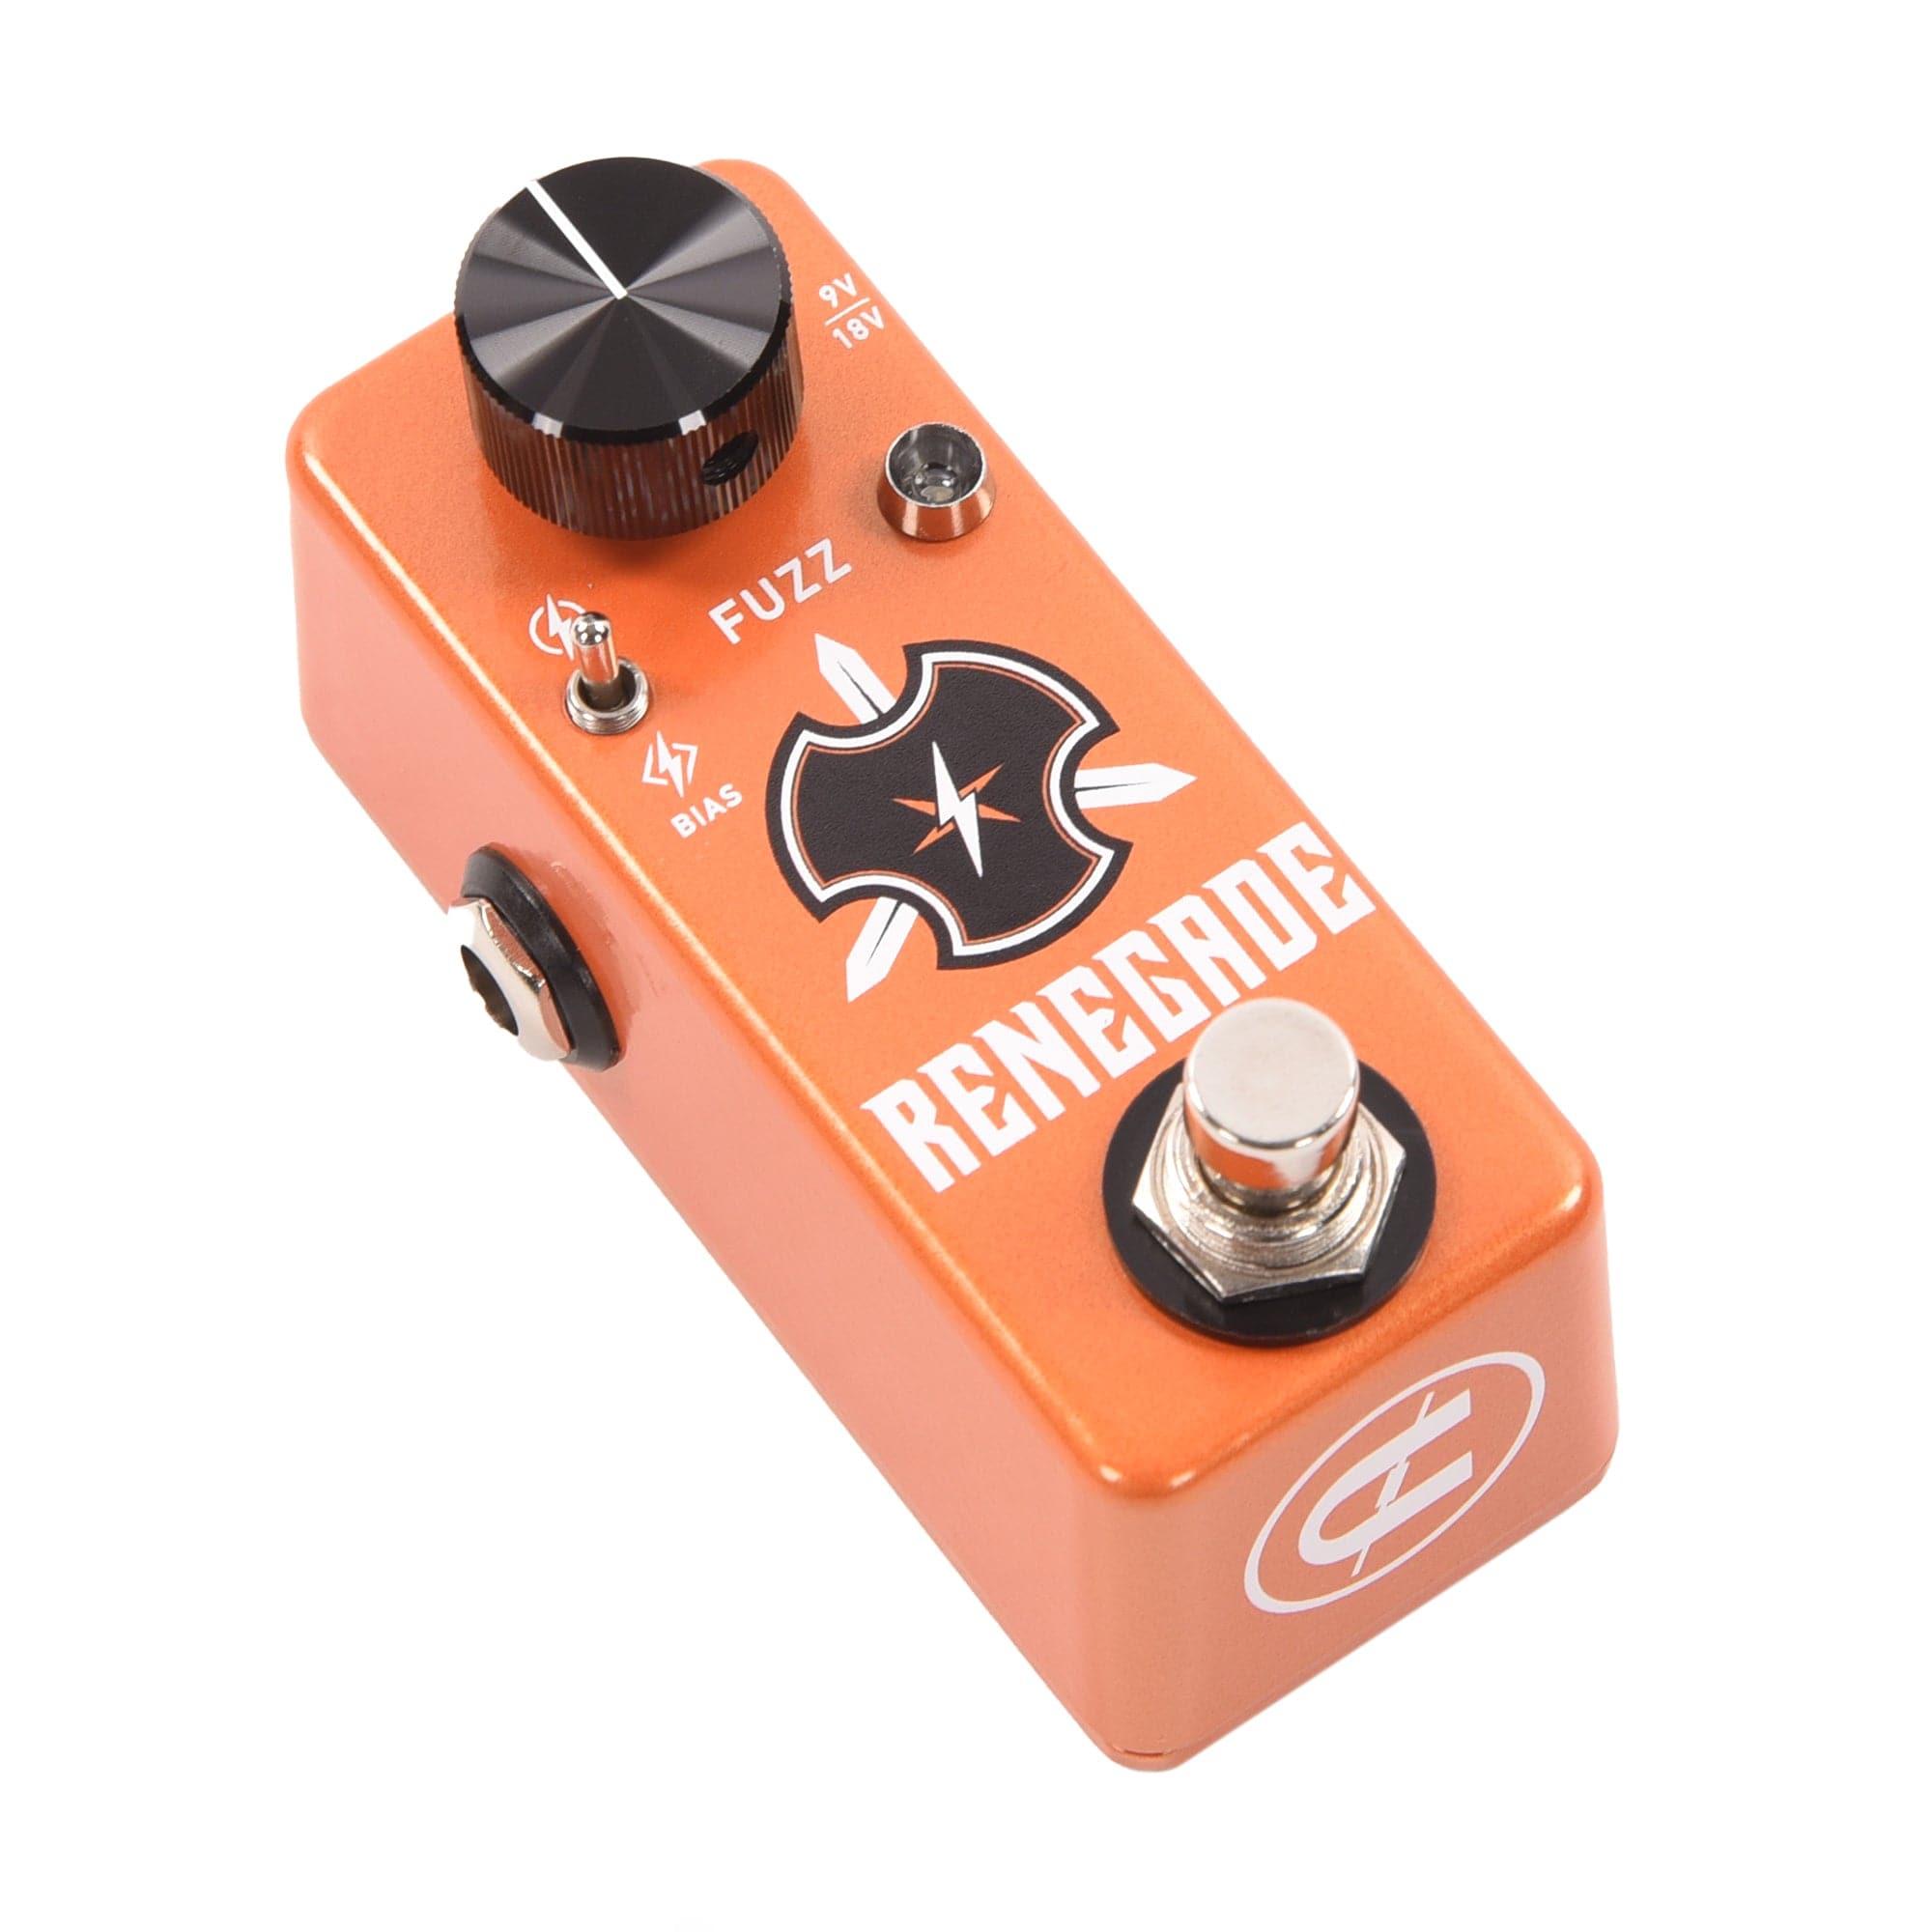 CopperSound Pedals Renegade Silicon Multi-Bias Fuzz Pedal Effects and Pedals / Fuzz